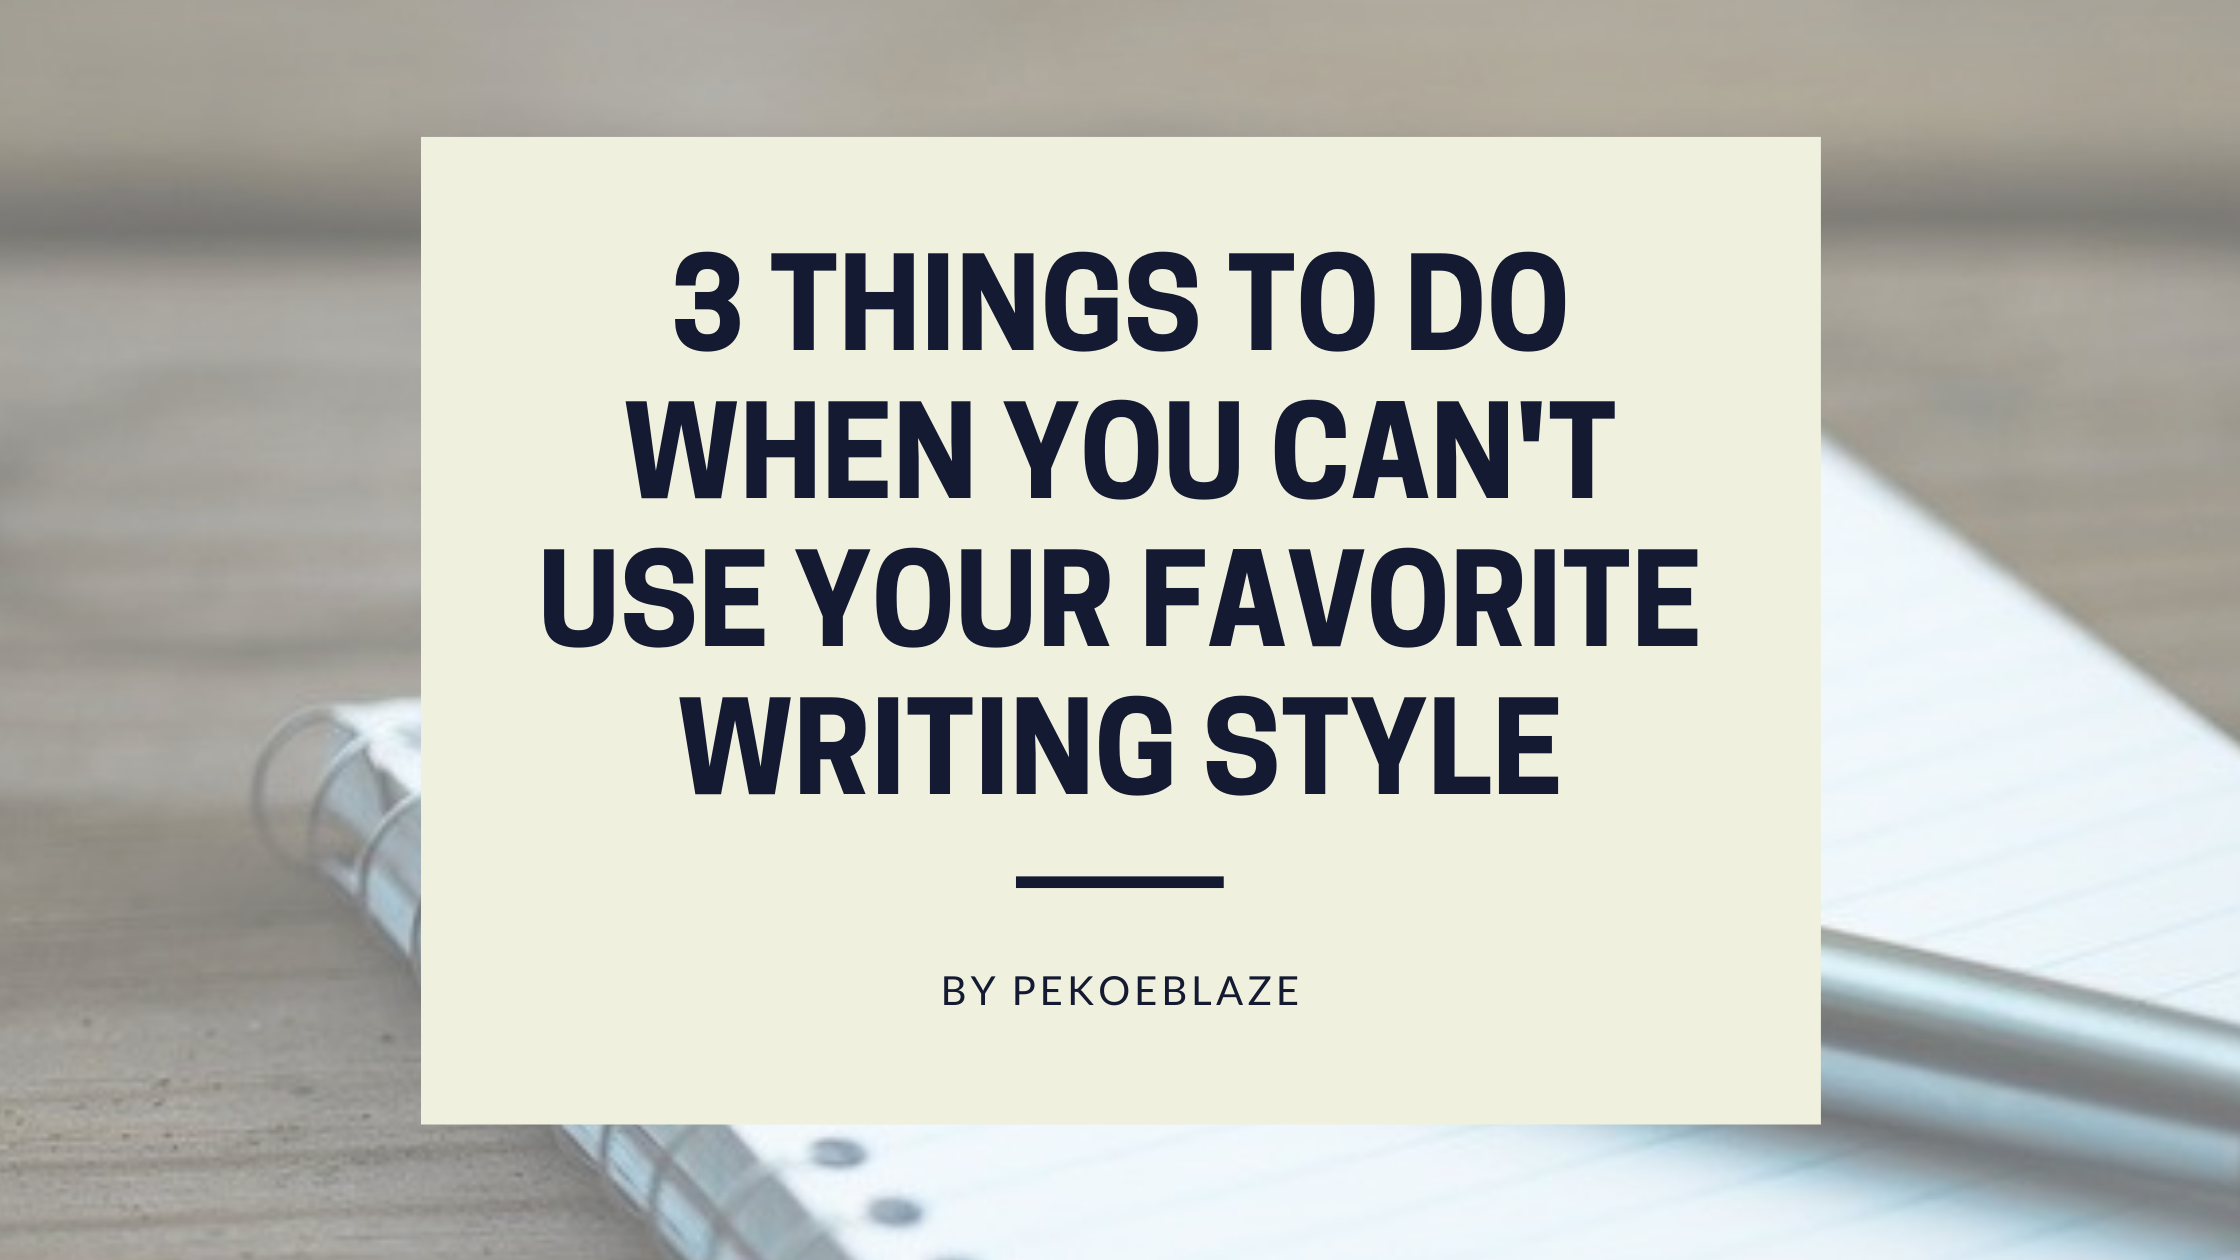 3 Things to Do When You Can’t Use Your Favorite Writing Style